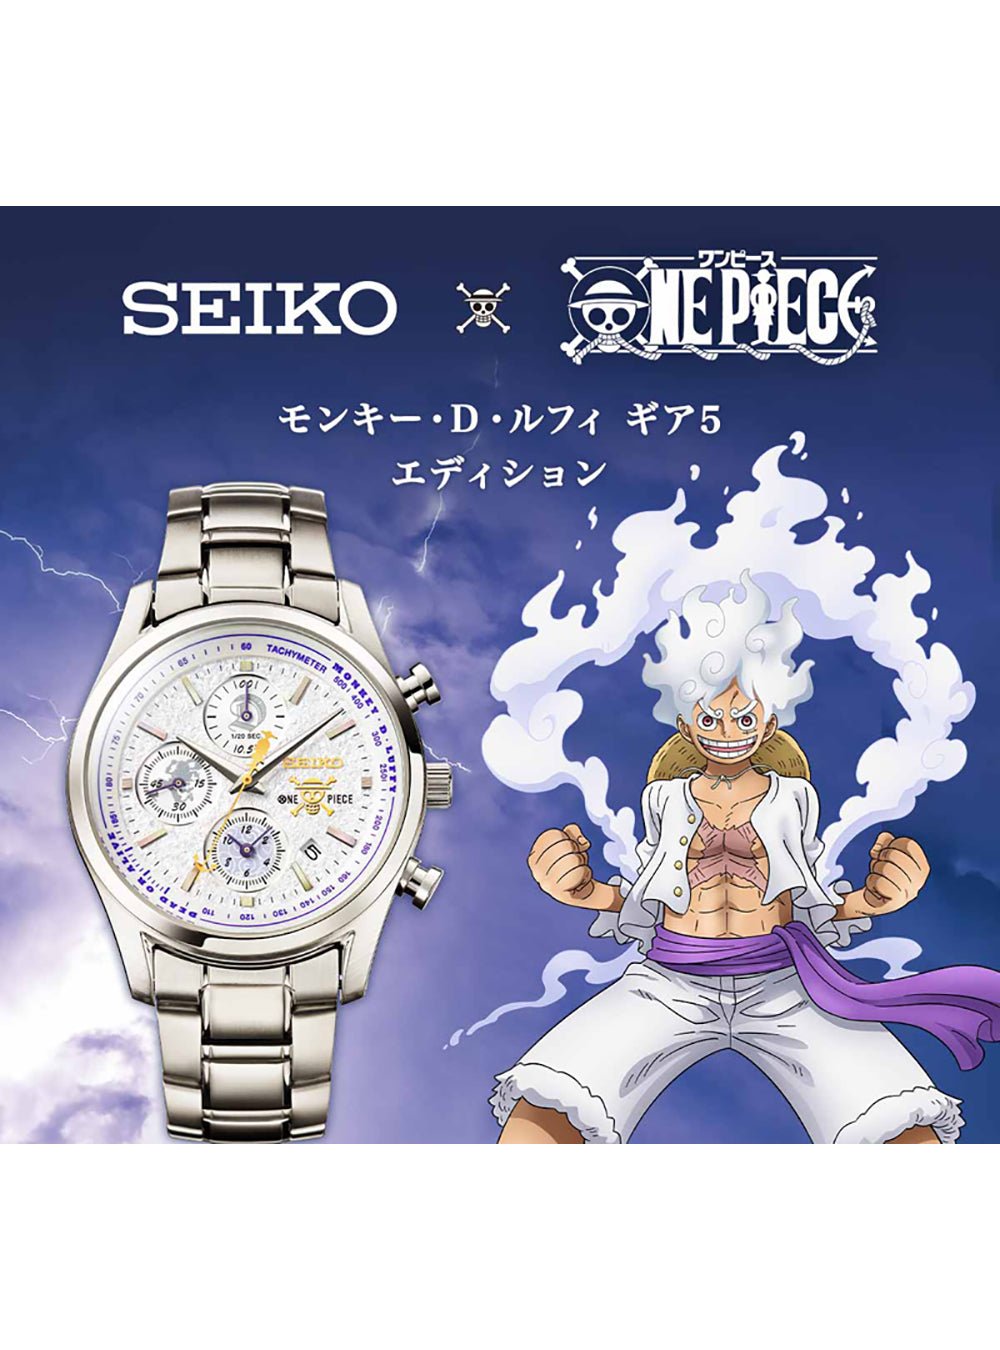 SEIKO × ONE PIECE MONKEY.D.LUFFY GEAR 5 LIMITED EDITION MADE IN JAPAN